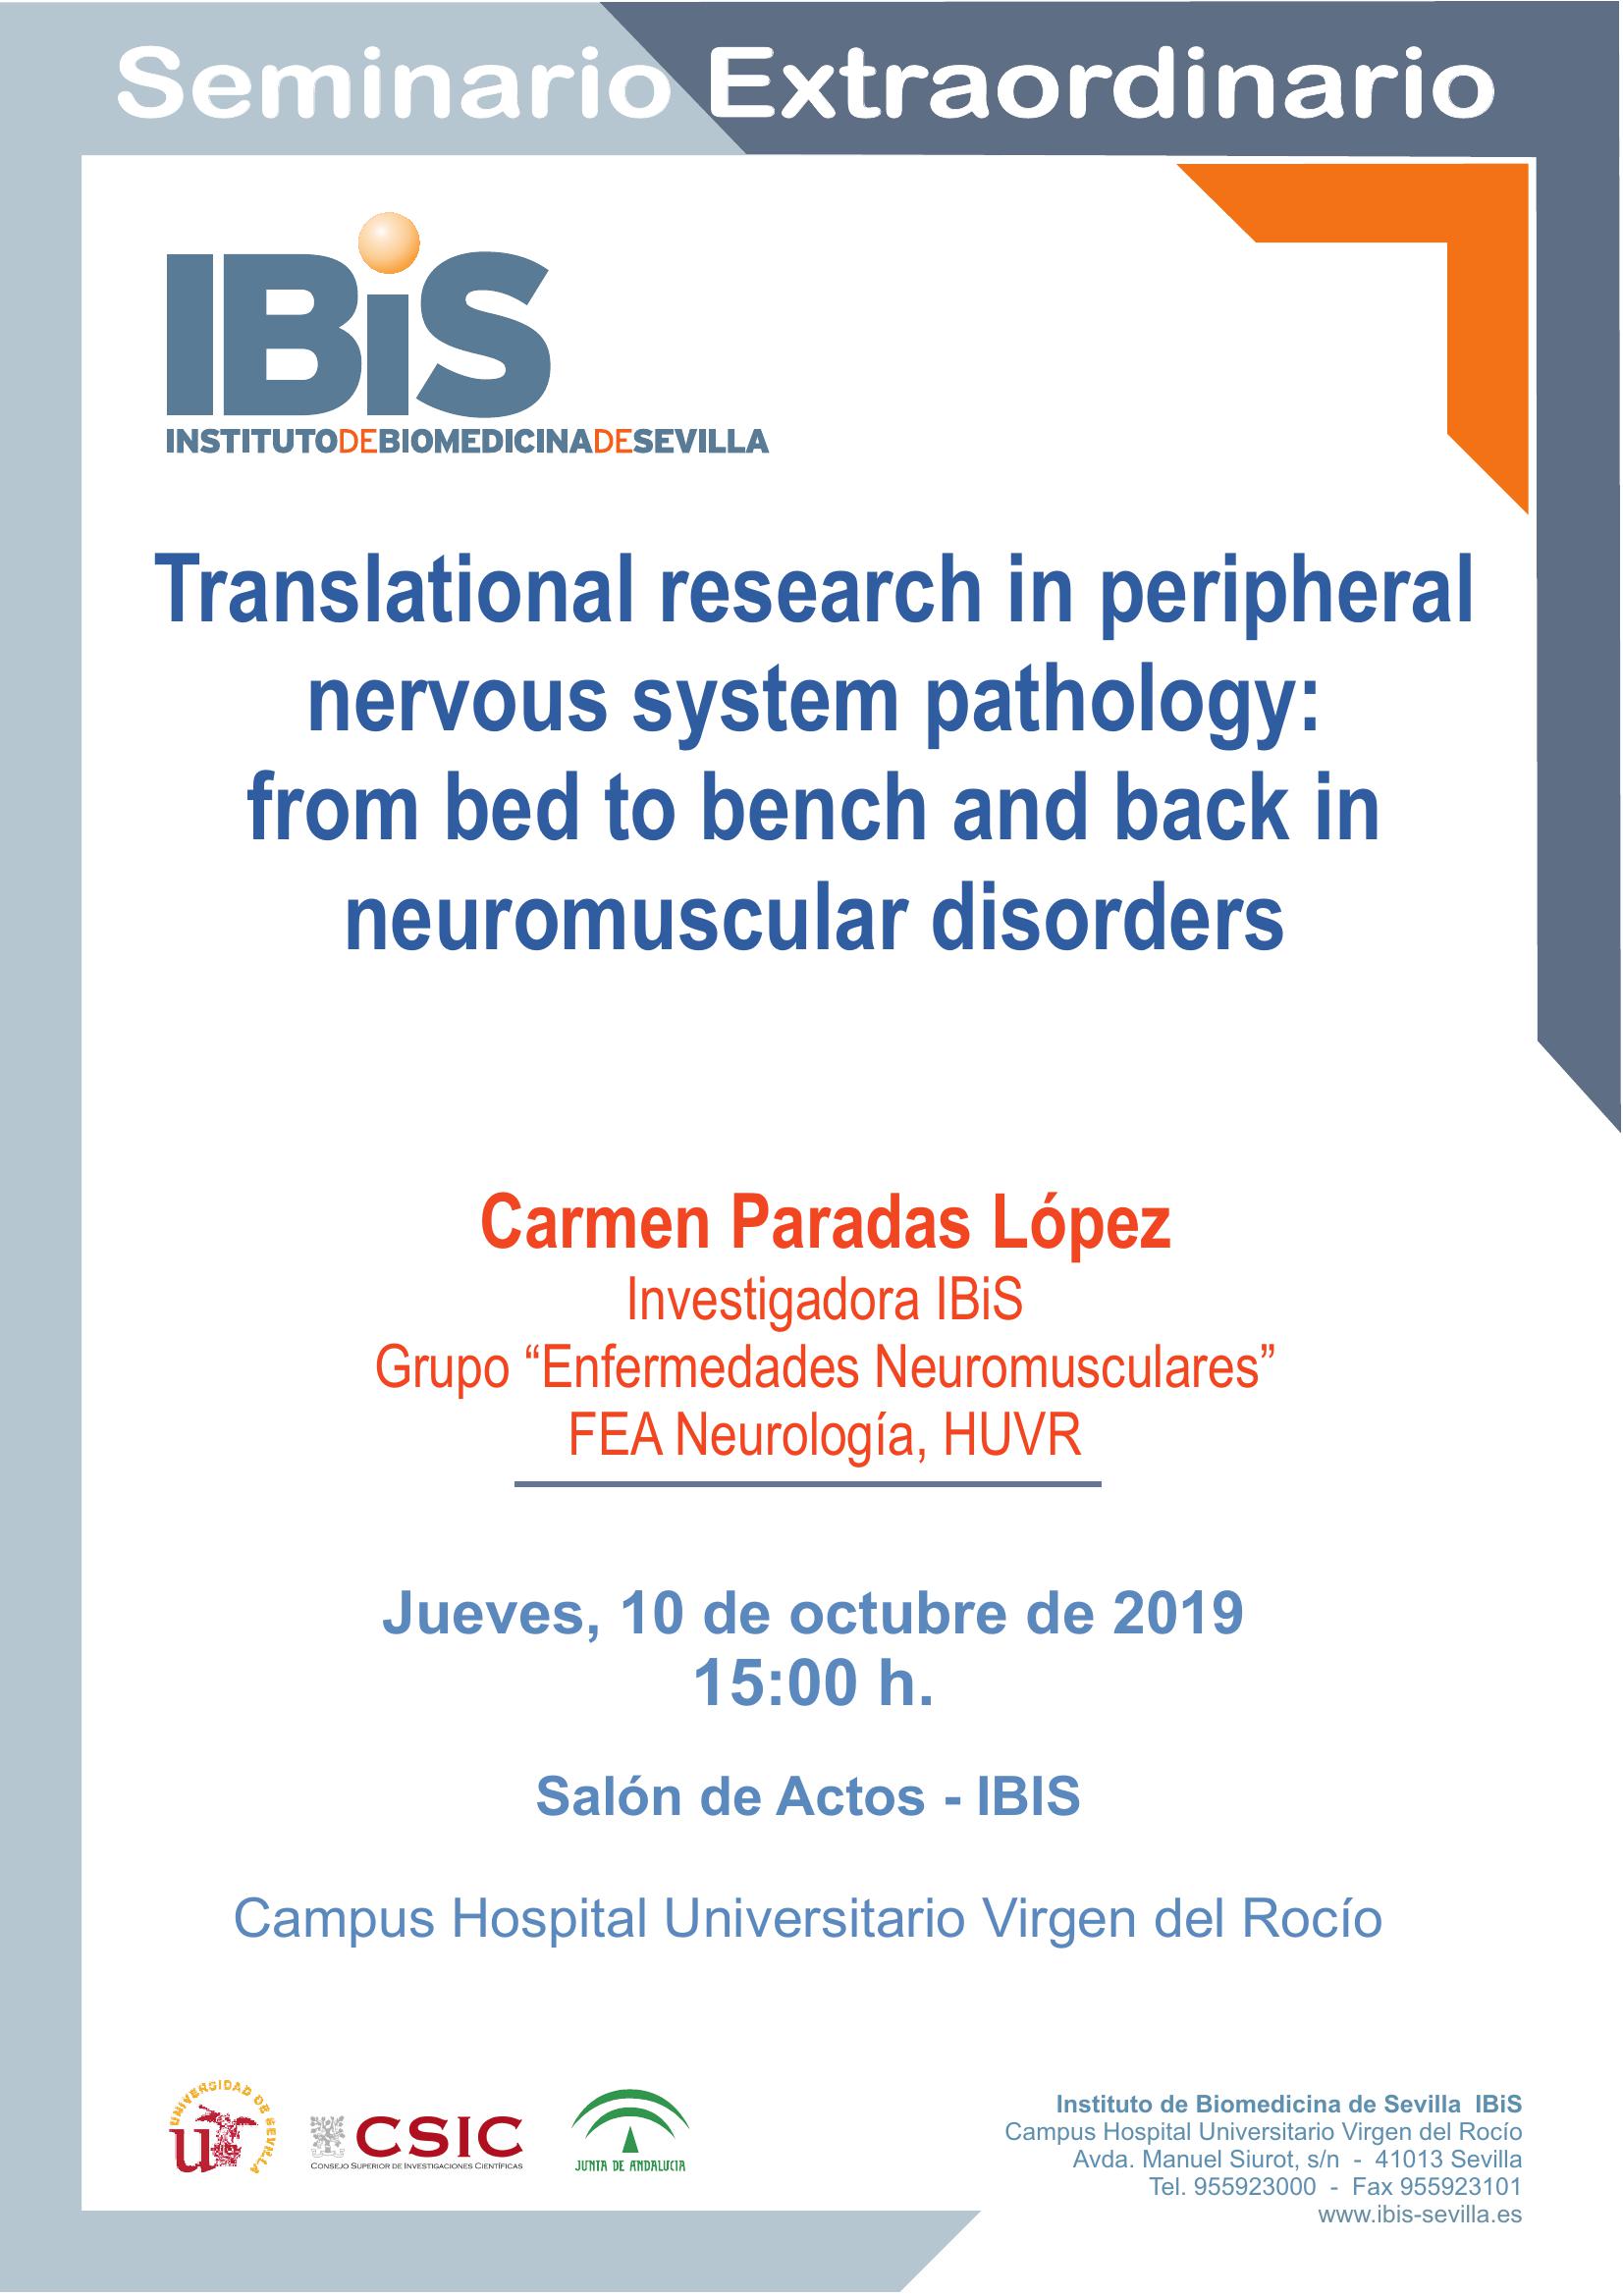 Poster: Translational research in peripheral nervous system pathology: from bed to bench and back in neuromuscular disorders